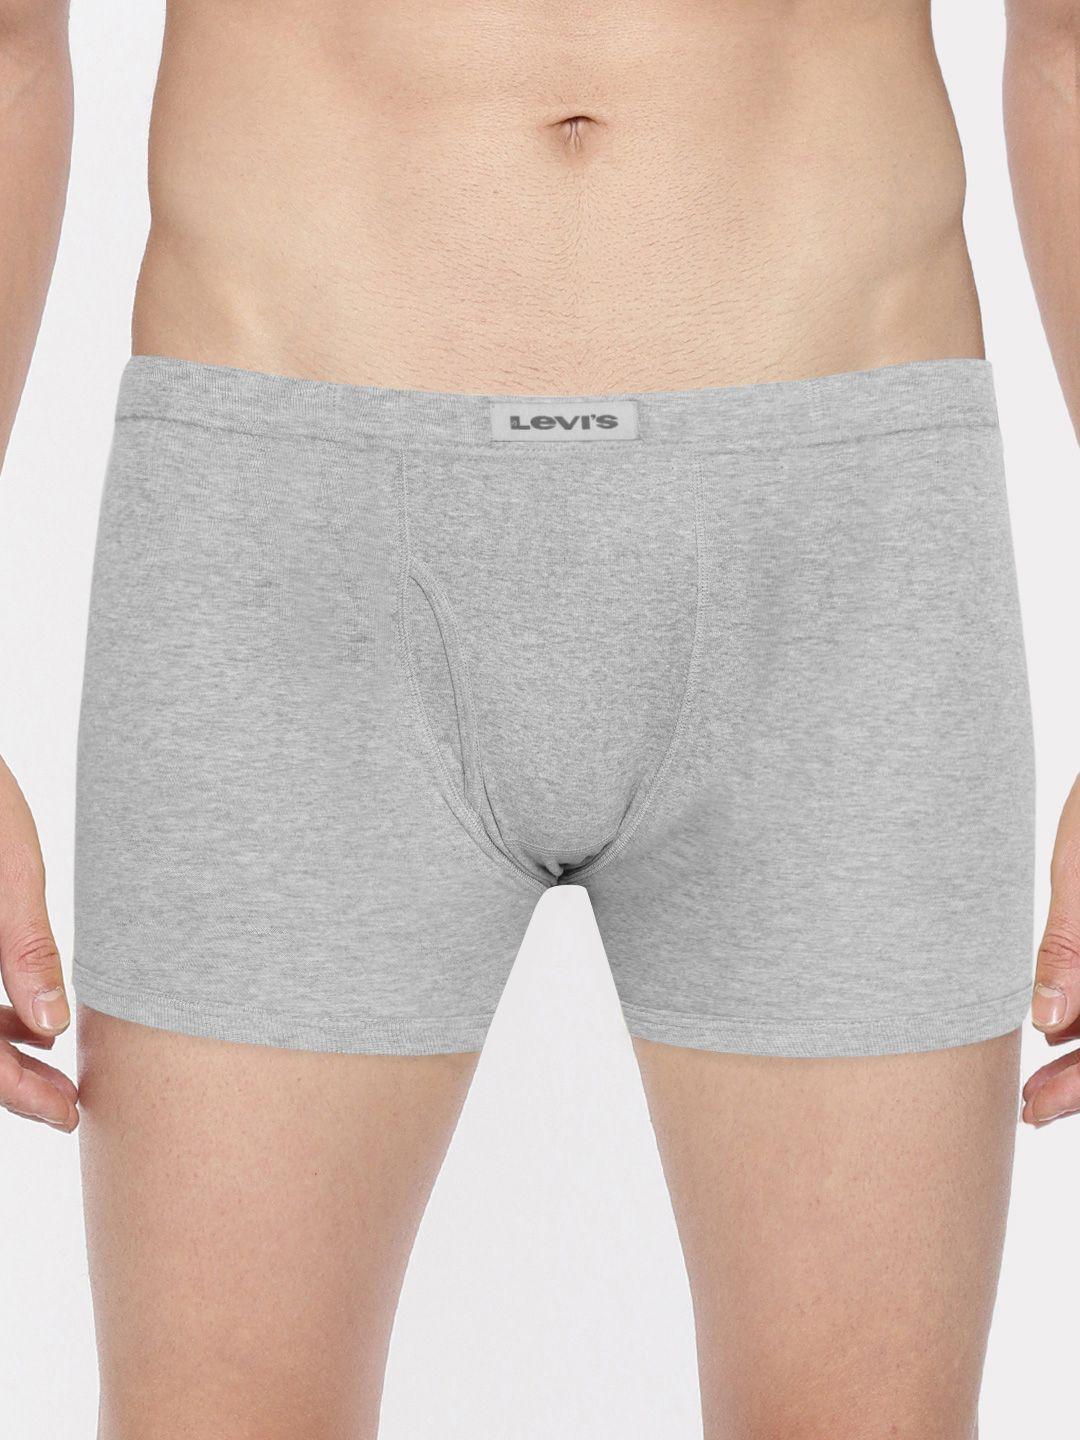 levis men smartskin technology cotton boxer brief with tag free comfort-010